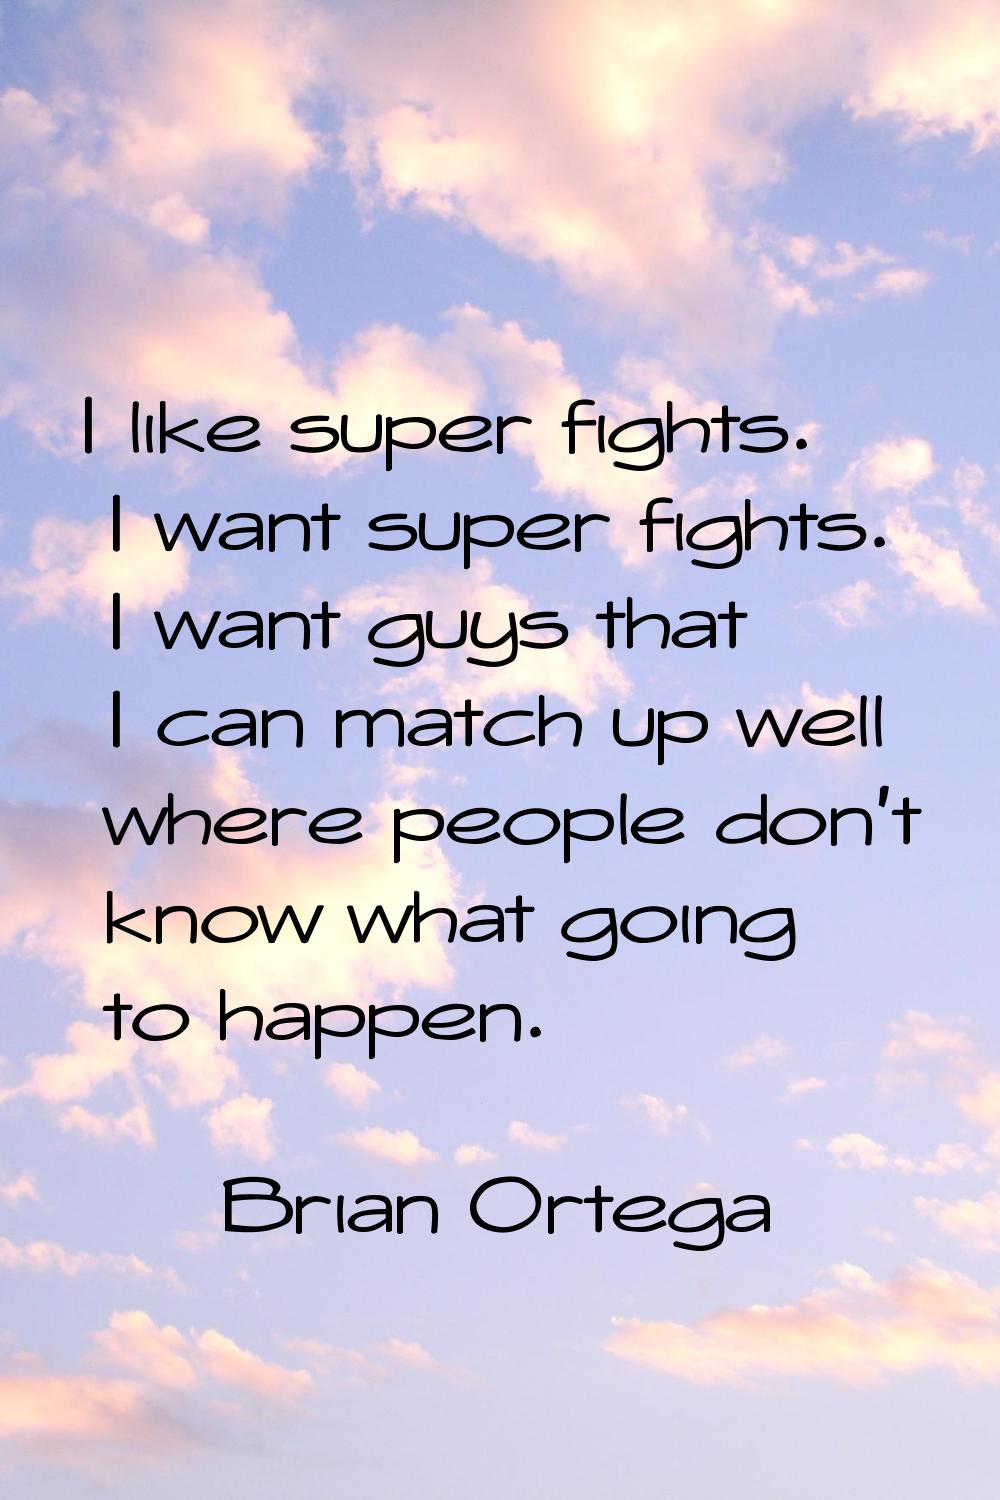 I like super fights. I want super fights. I want guys that I can match up well where people don't k